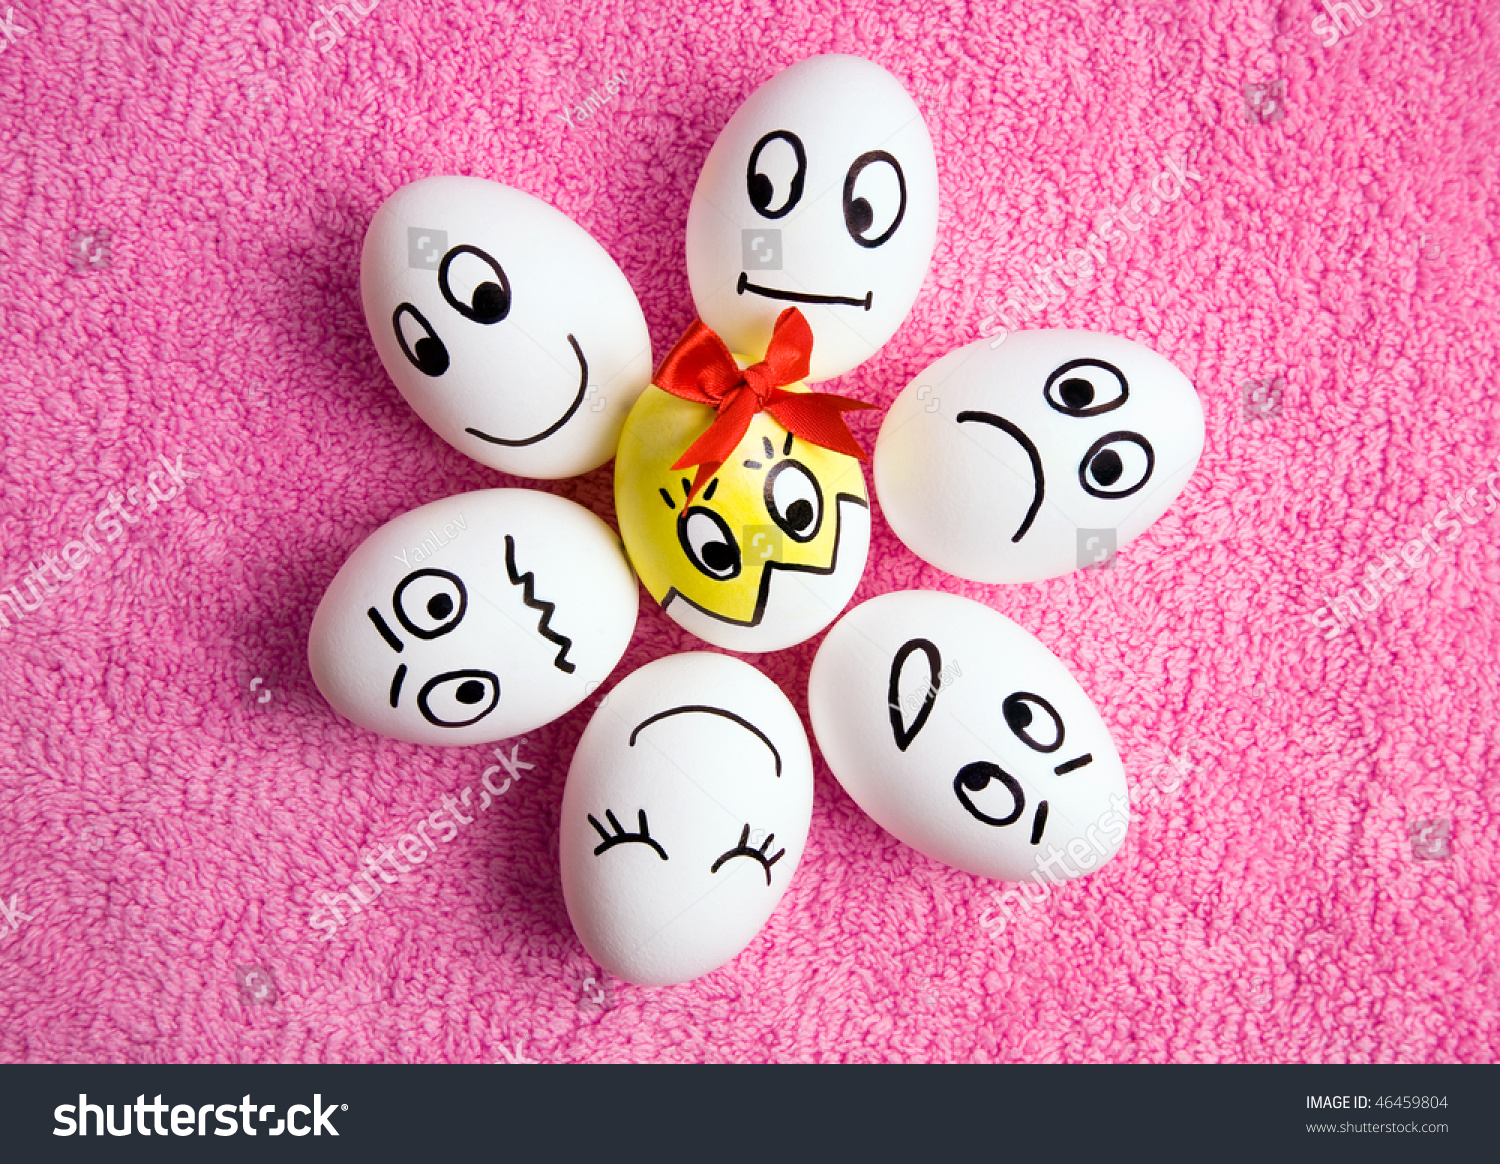 Kumpulan Funny Easter Eggs With Different Emotions On His Face